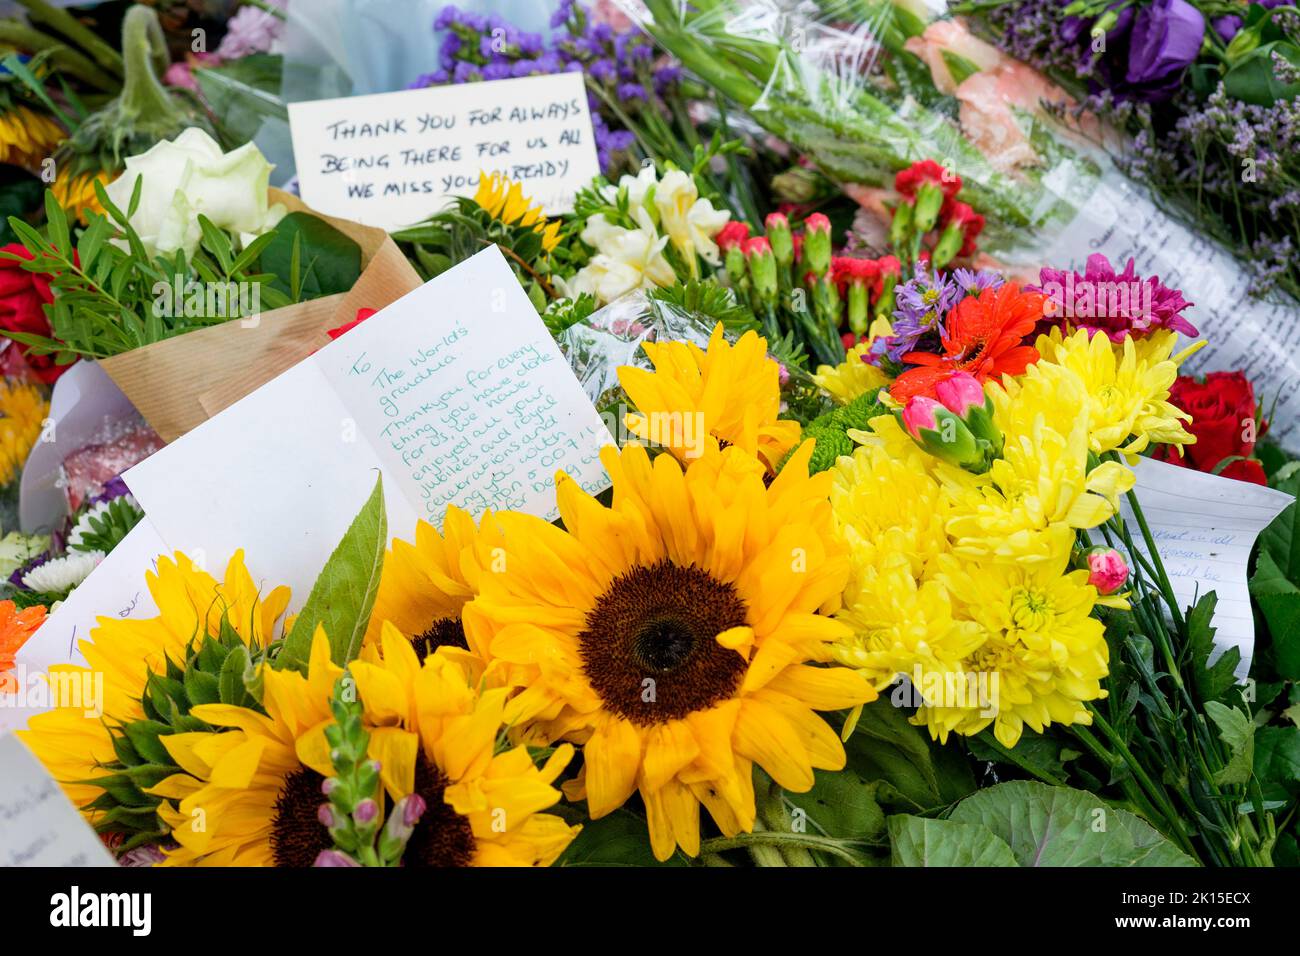 Her Majesty Queen Elizabeth II funeral floral tributes- Floral tributes and hand written cards left by the public are pictured in Green Park, London. Stock Photo